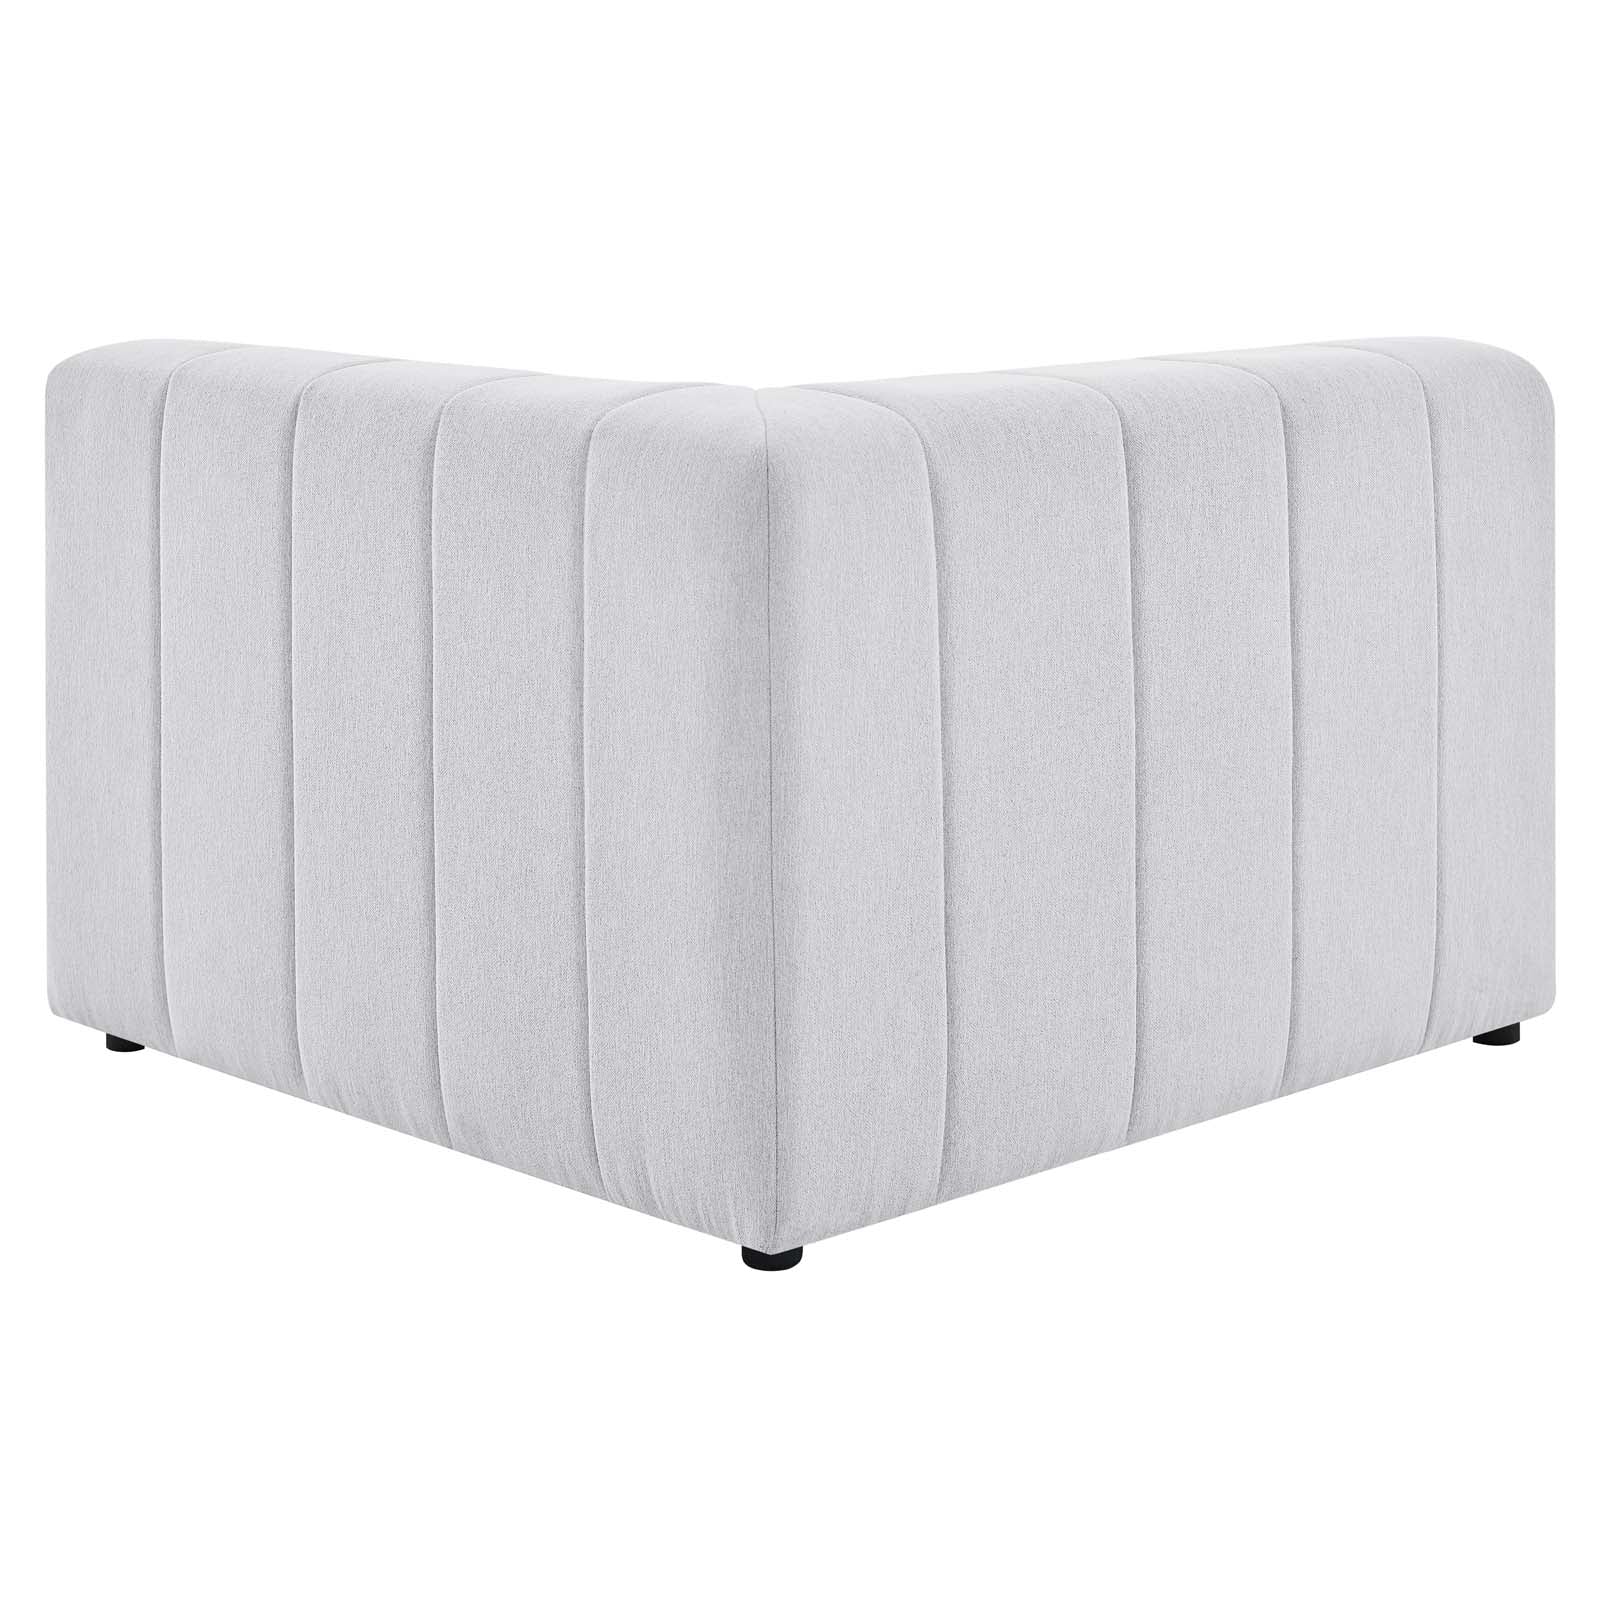 Modway Sectional Sofas - Bartlett Upholstered Fabric 4-Piece Sectional Sofa Ivory